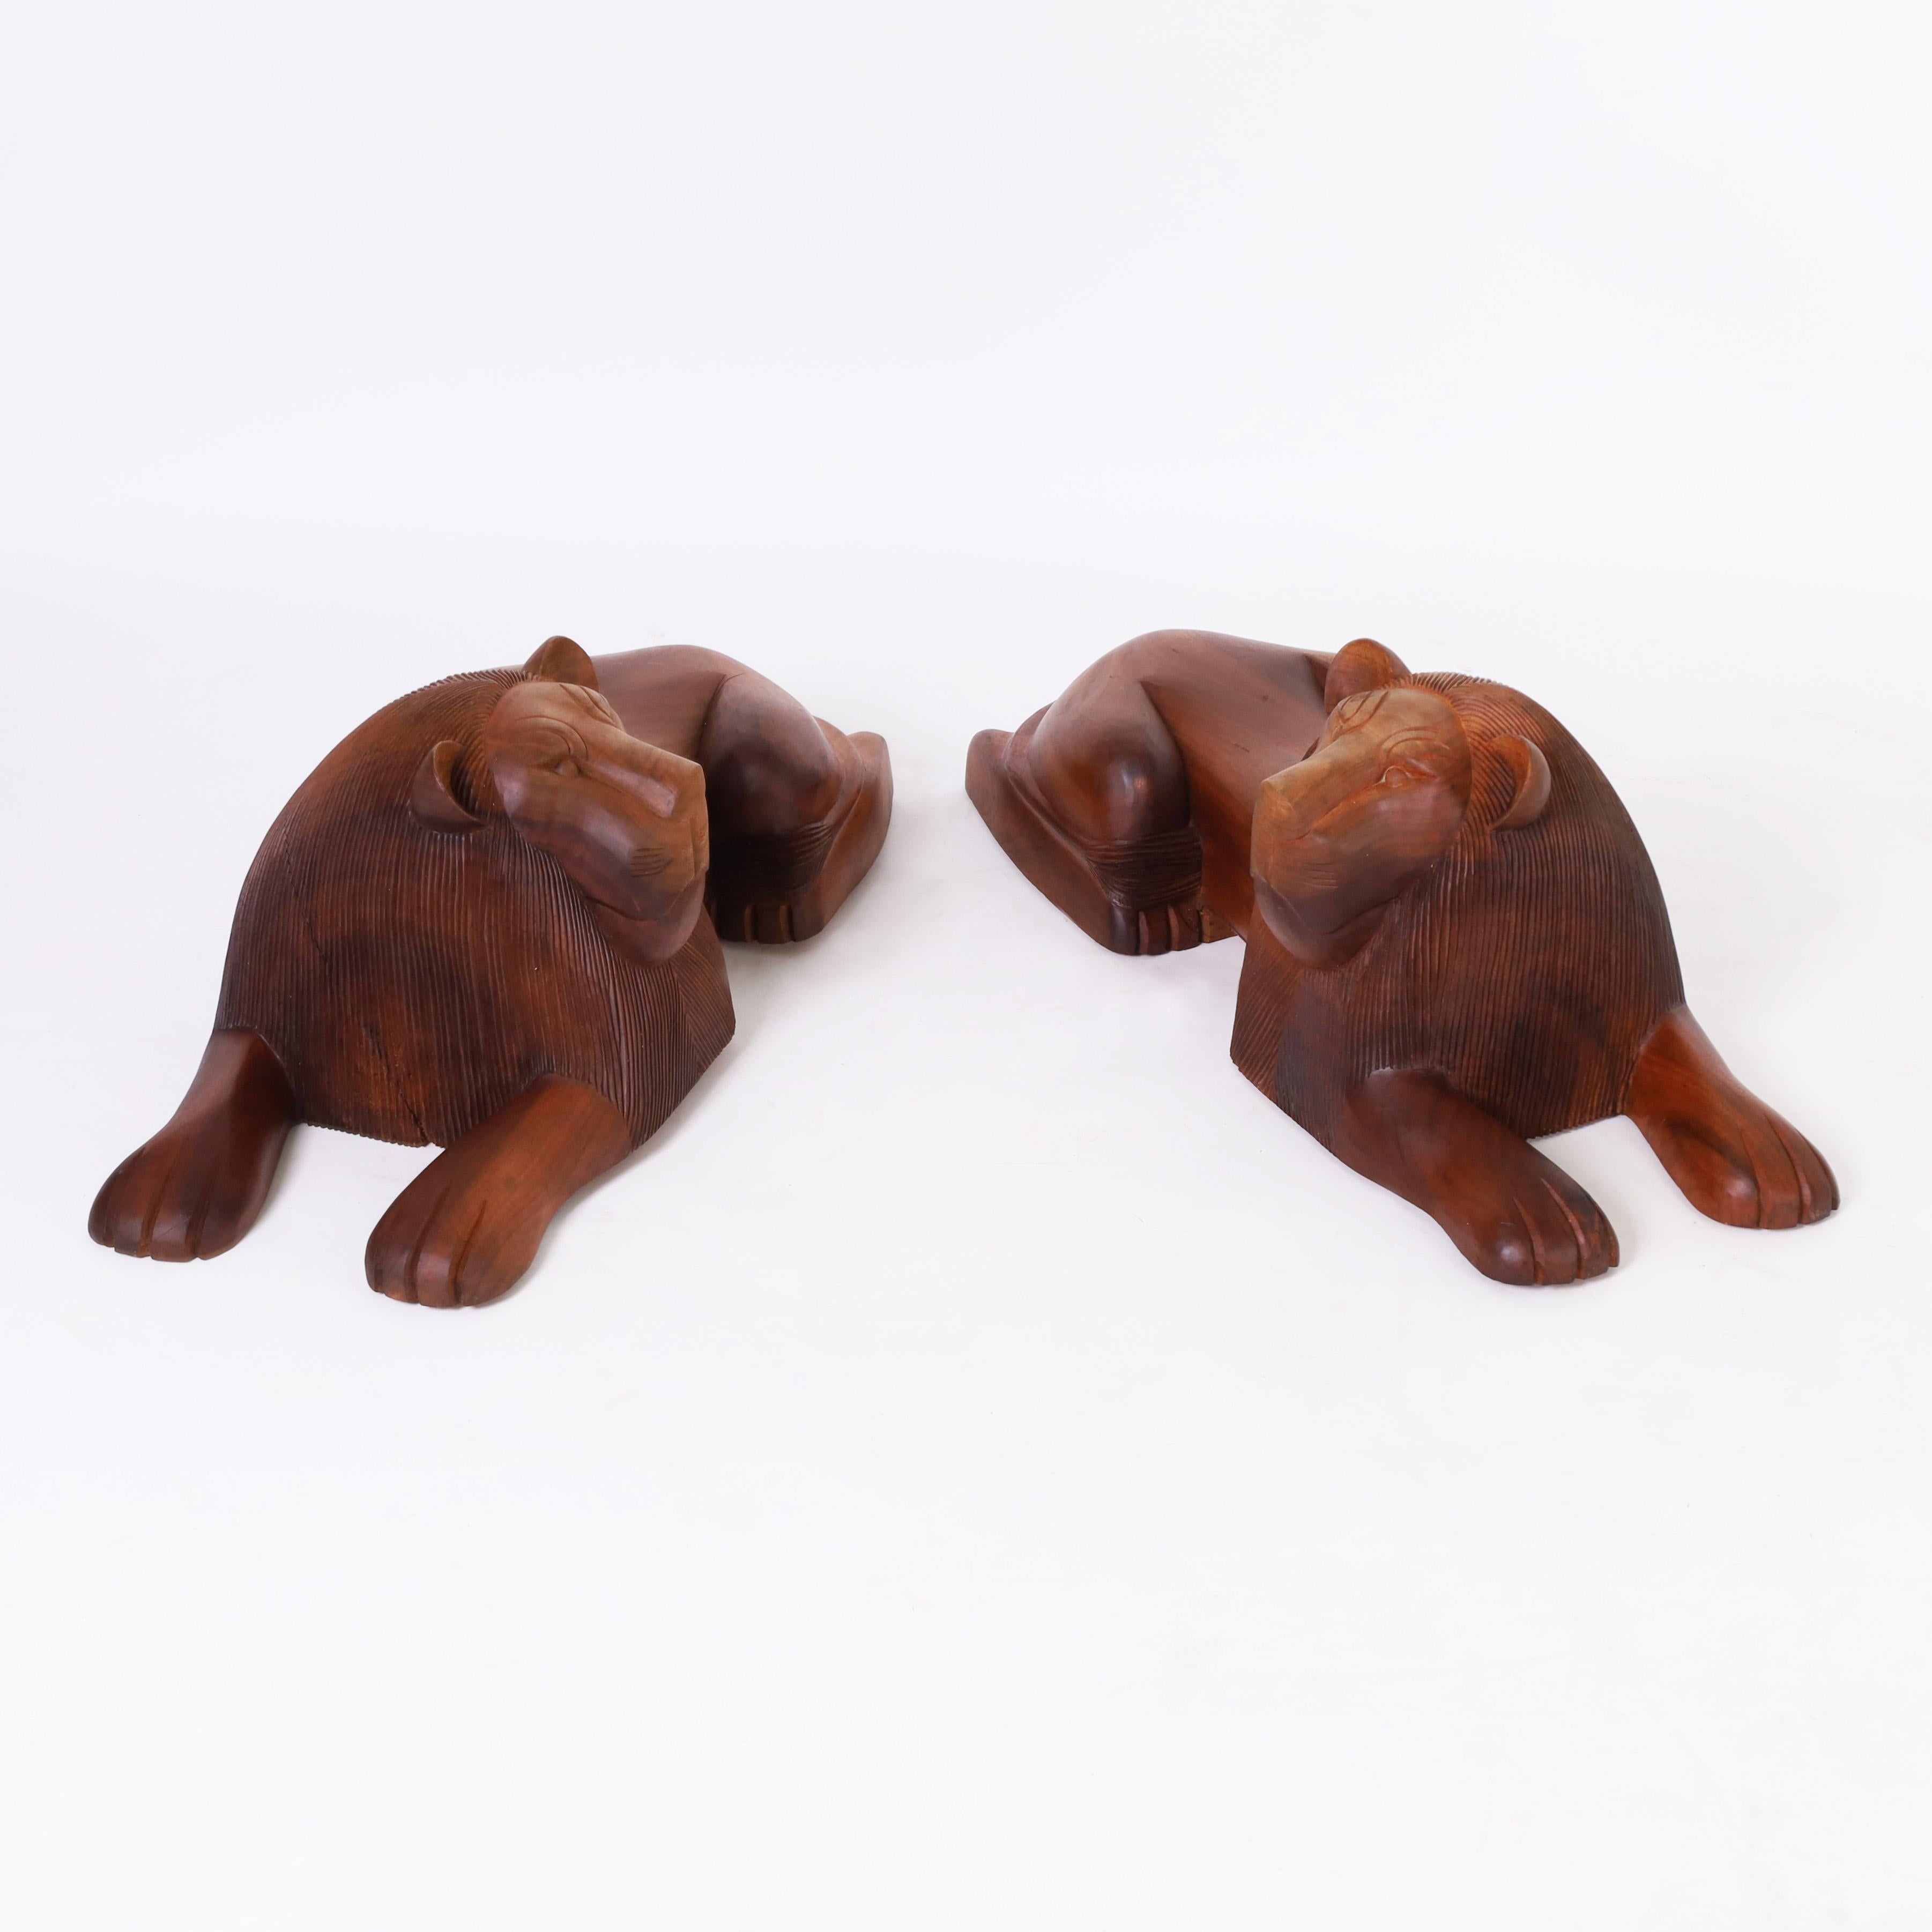 Rare and remarkable pair of mid century lions in repose hand carved, in a stylized modern form, from the Cammatillo tree or Kingwood grown in the Minas Gerais region of Brazil.